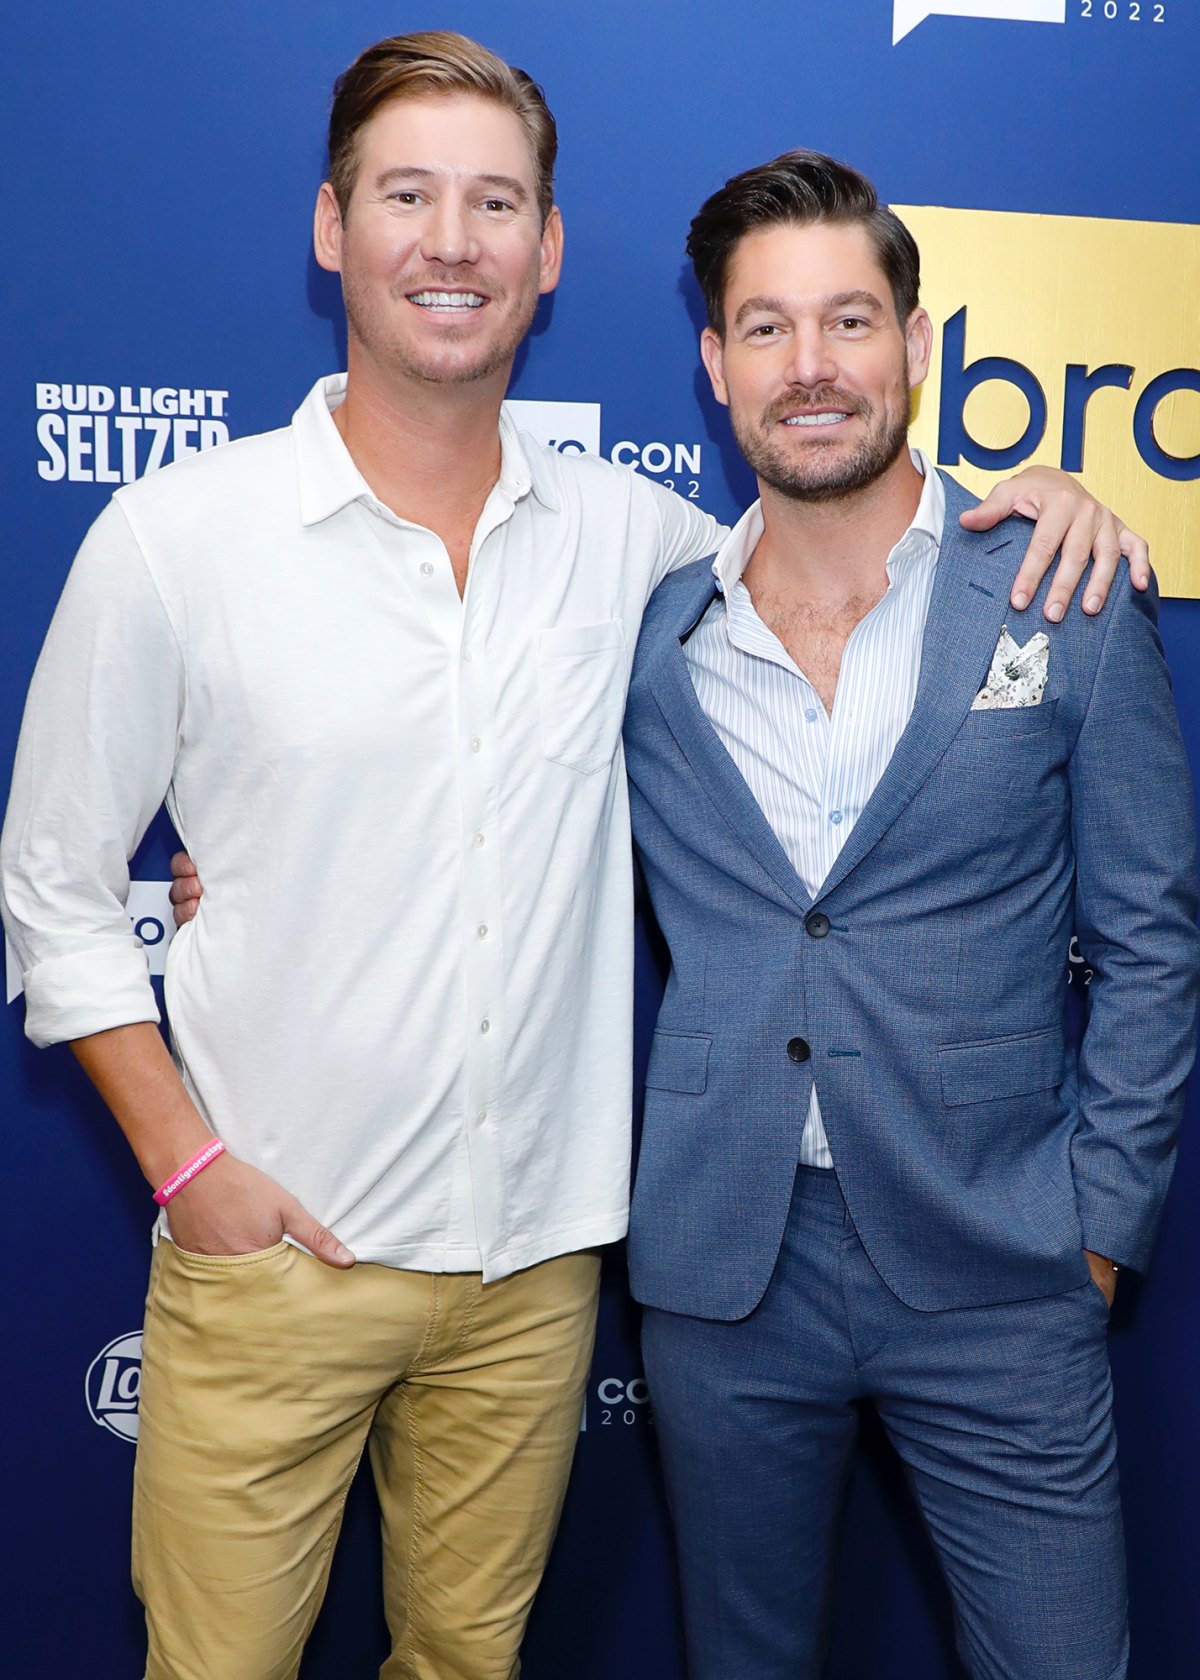 Southern Charm's Austen Kroll and Craig Conover Compare Potential Taylor Ann Green Joining to 'Vanderpump Rules' Season 1